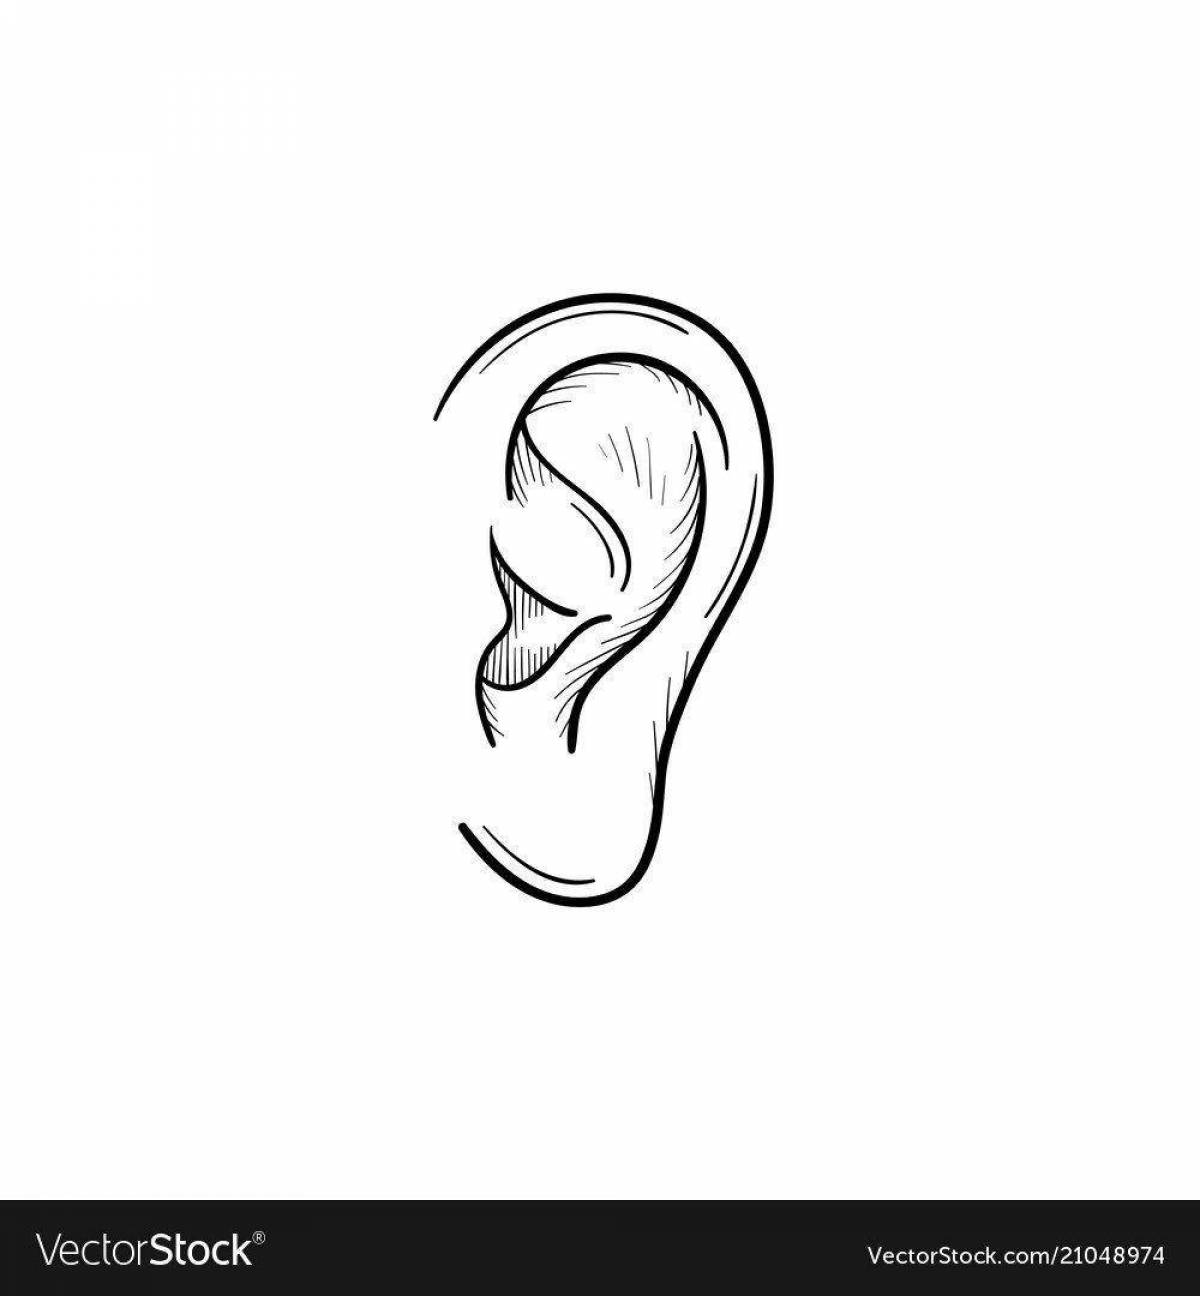 Glowing ear coloring pages